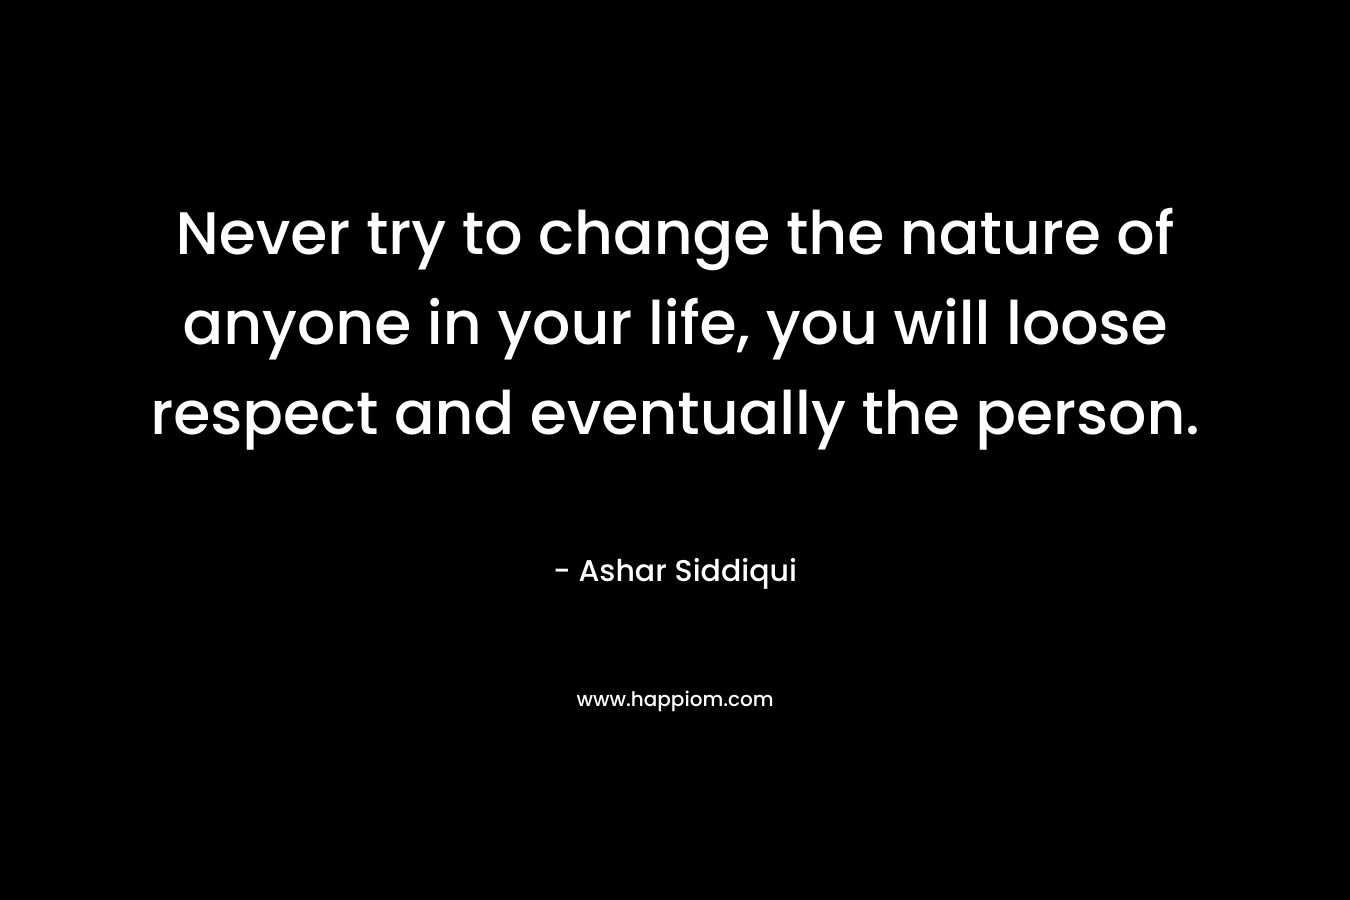 Never try to change the nature of anyone in your life, you will loose respect and eventually the person. – Ashar Siddiqui